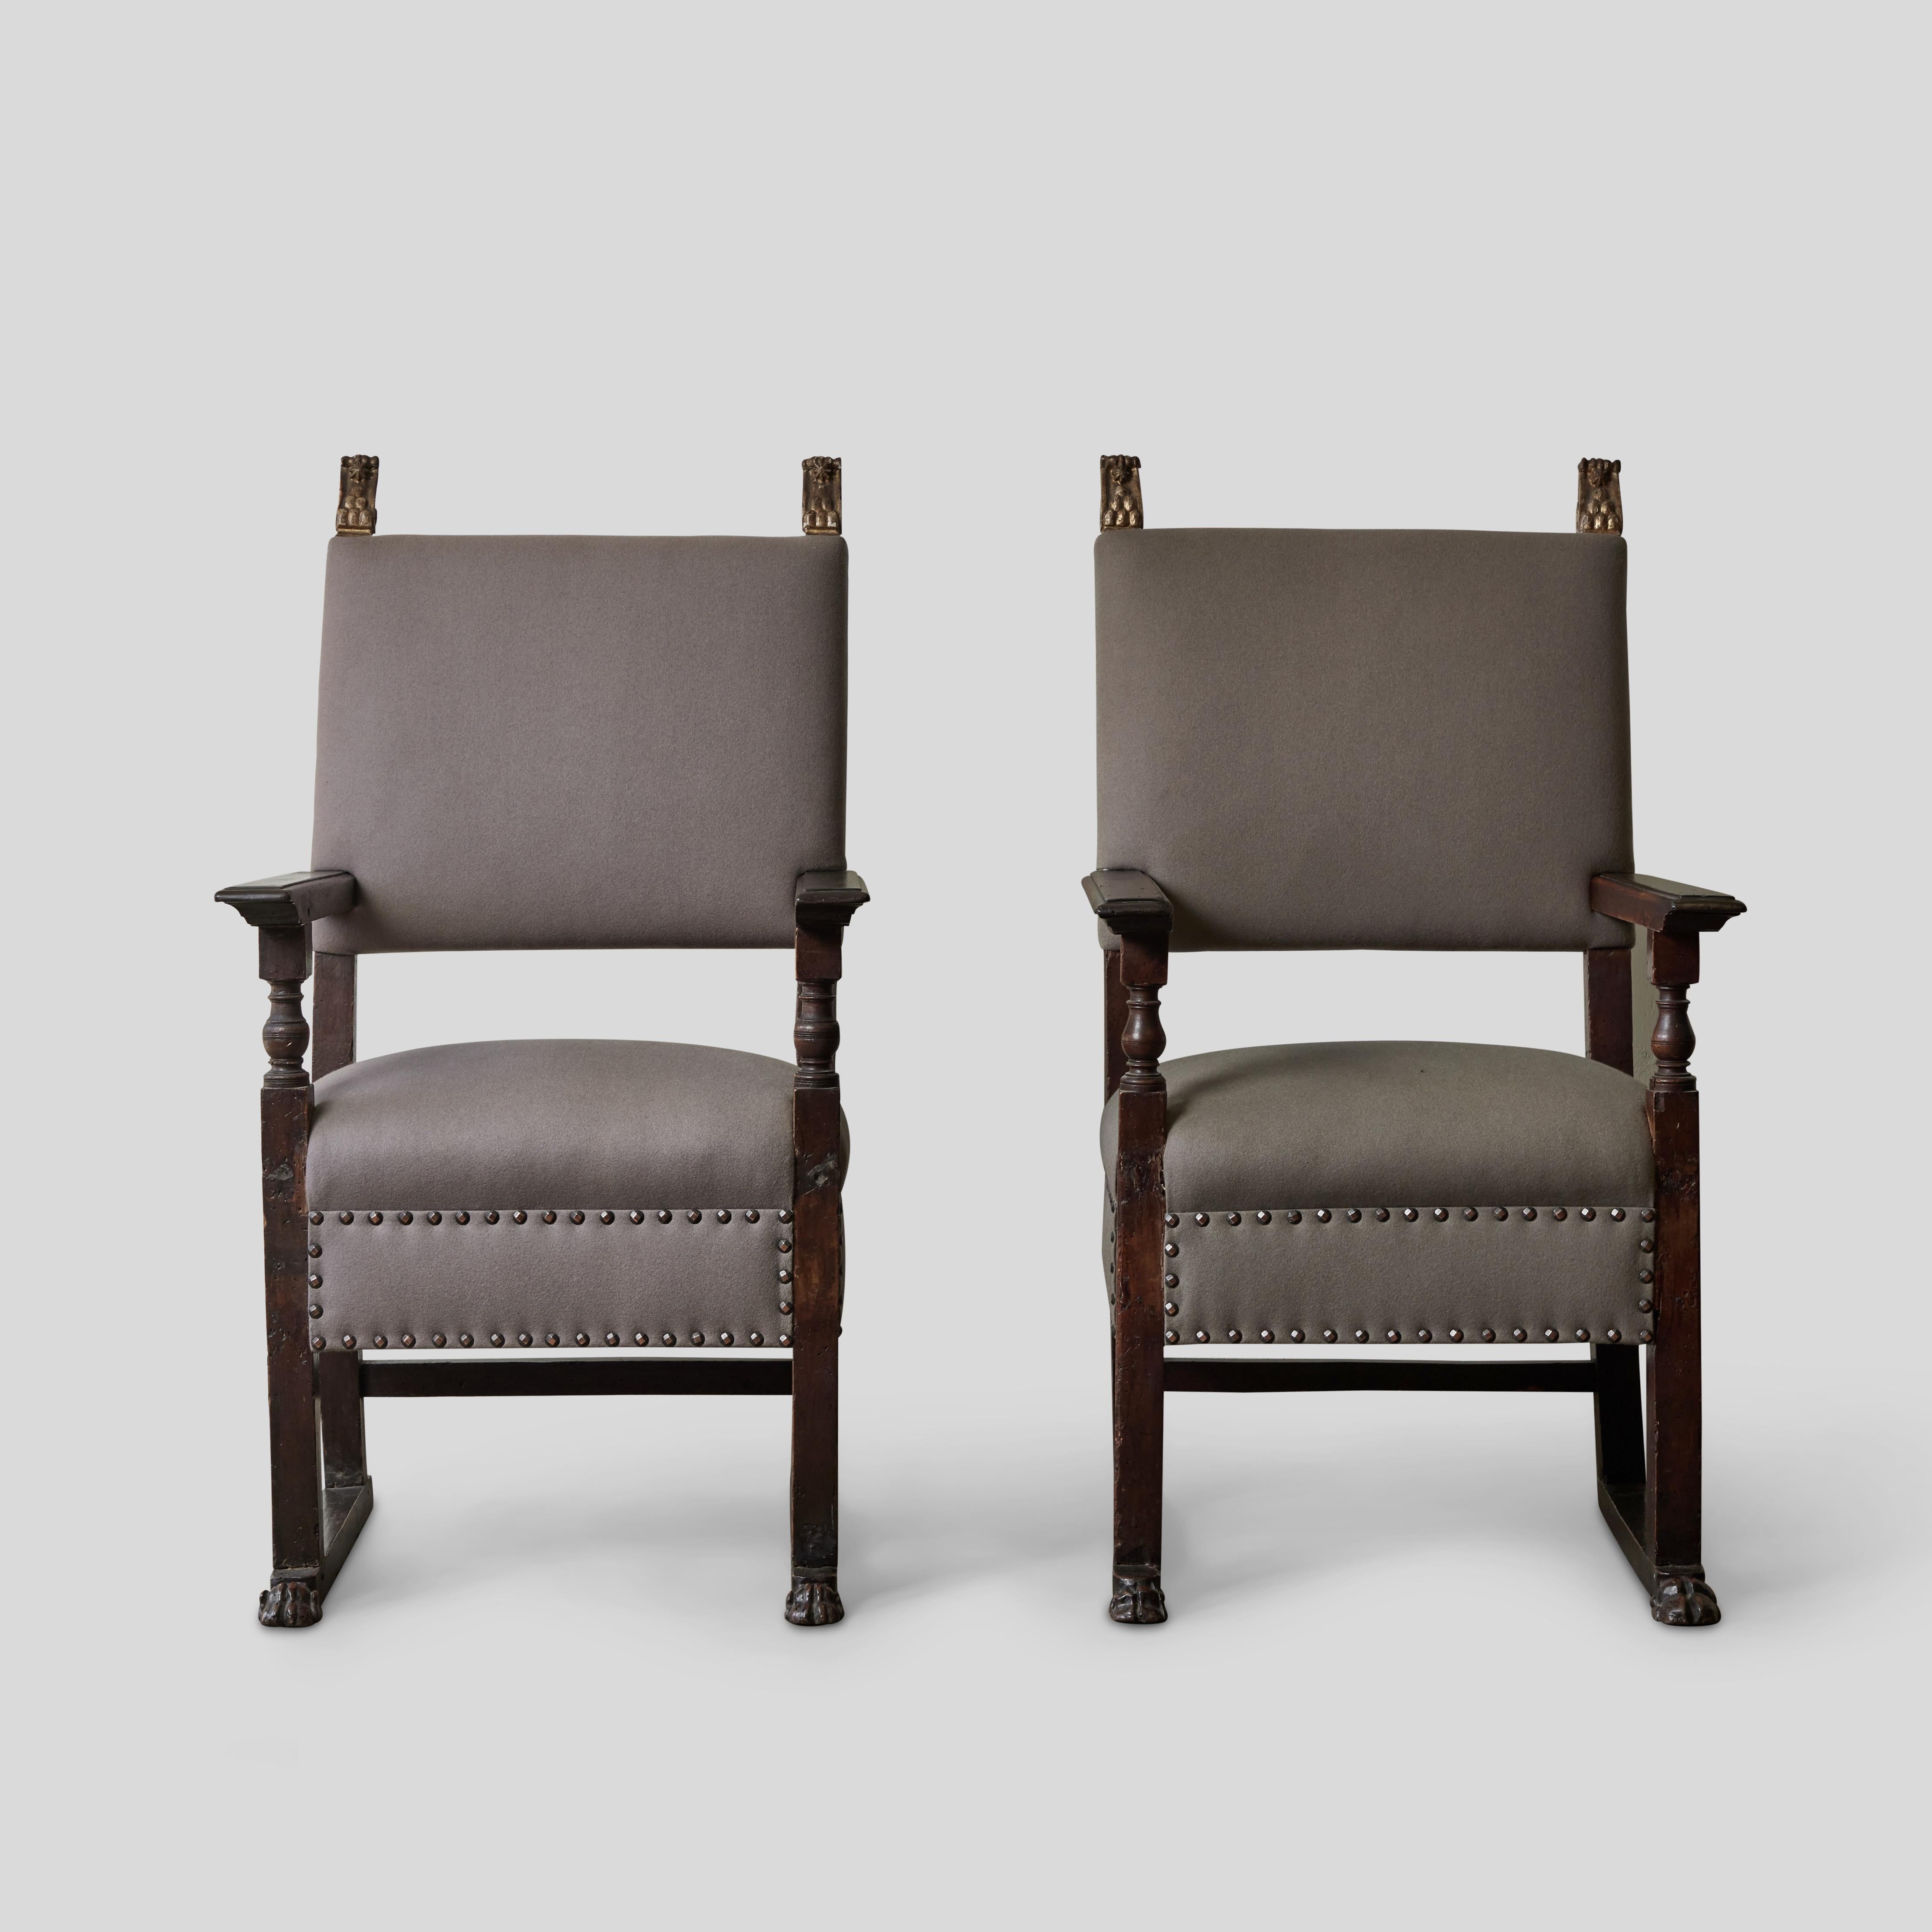 Upholstered 18th Century Italian Walnut Arm Chairs For Sale 2